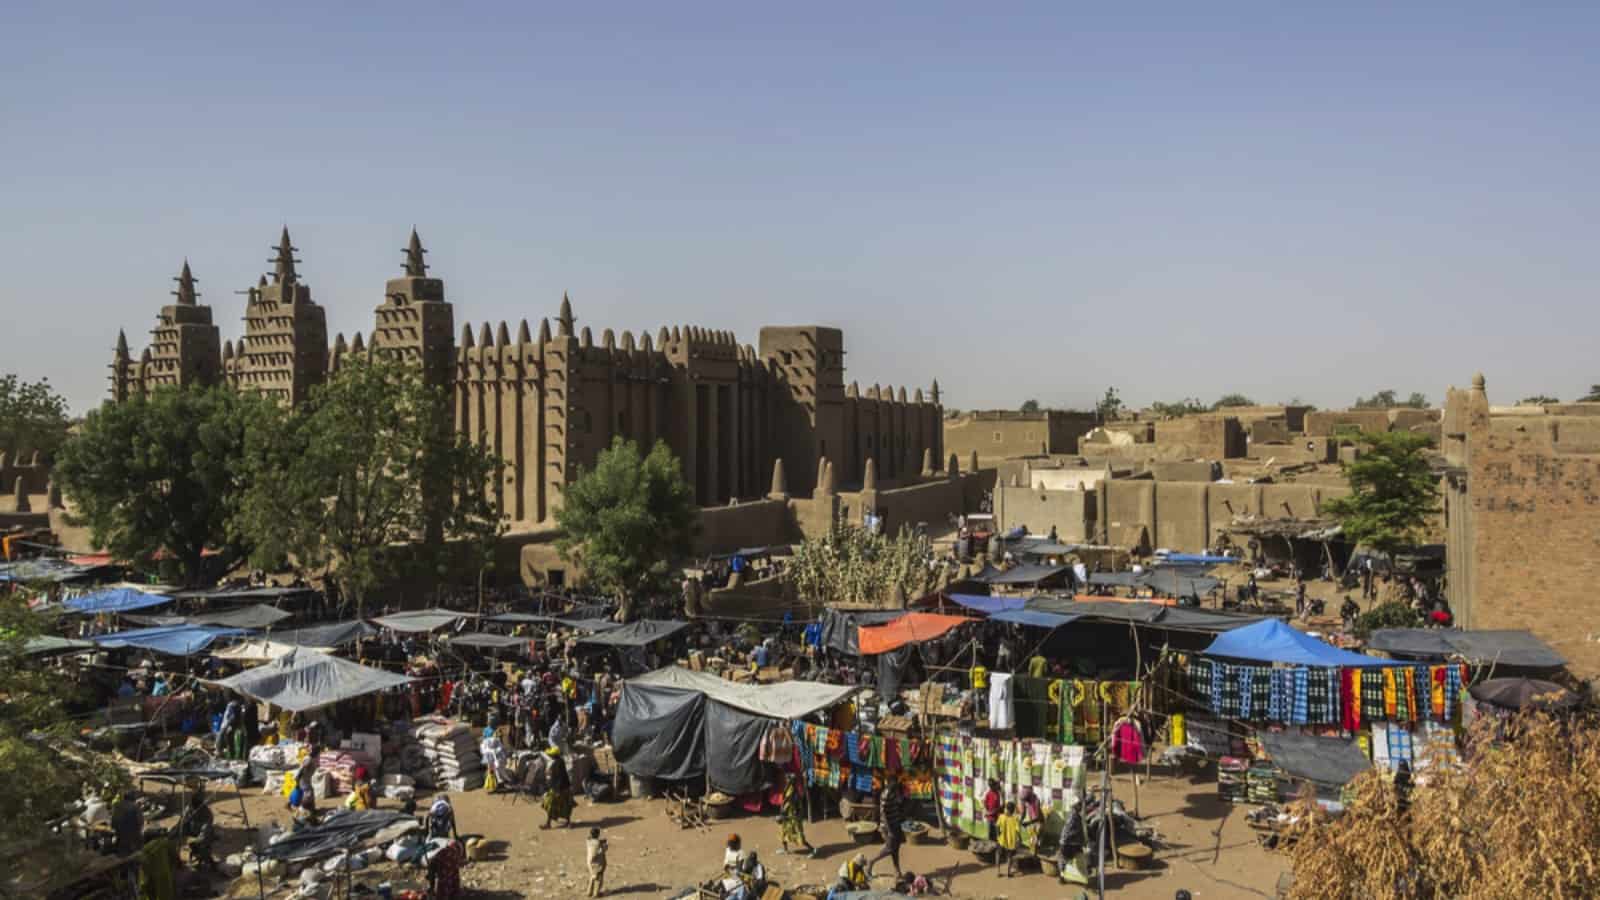 The great mosque and the market, Djenné, Mali